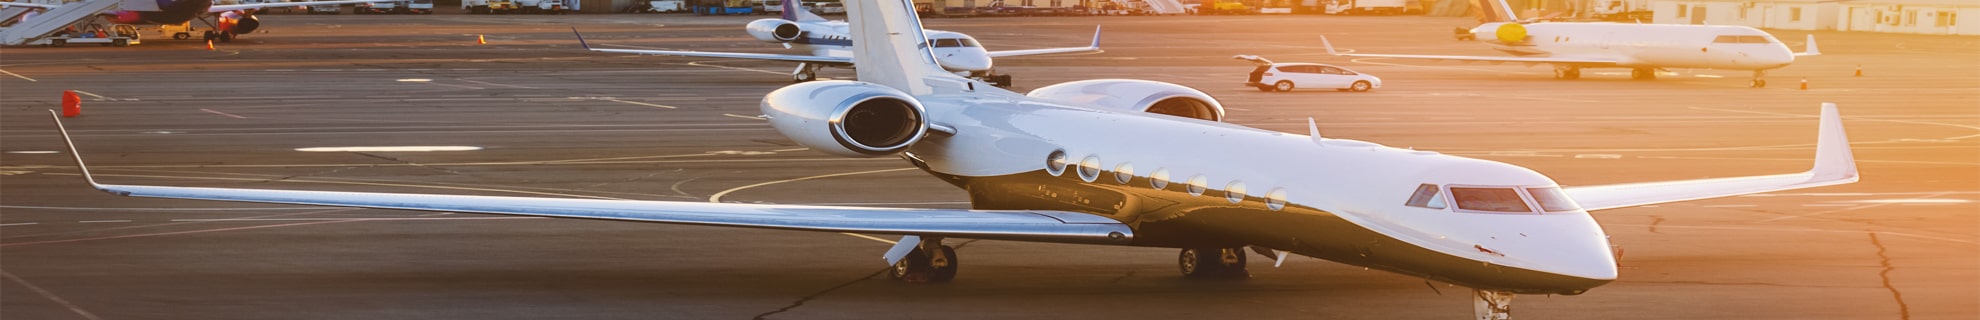 private jet aviation & fbos ground transportation support